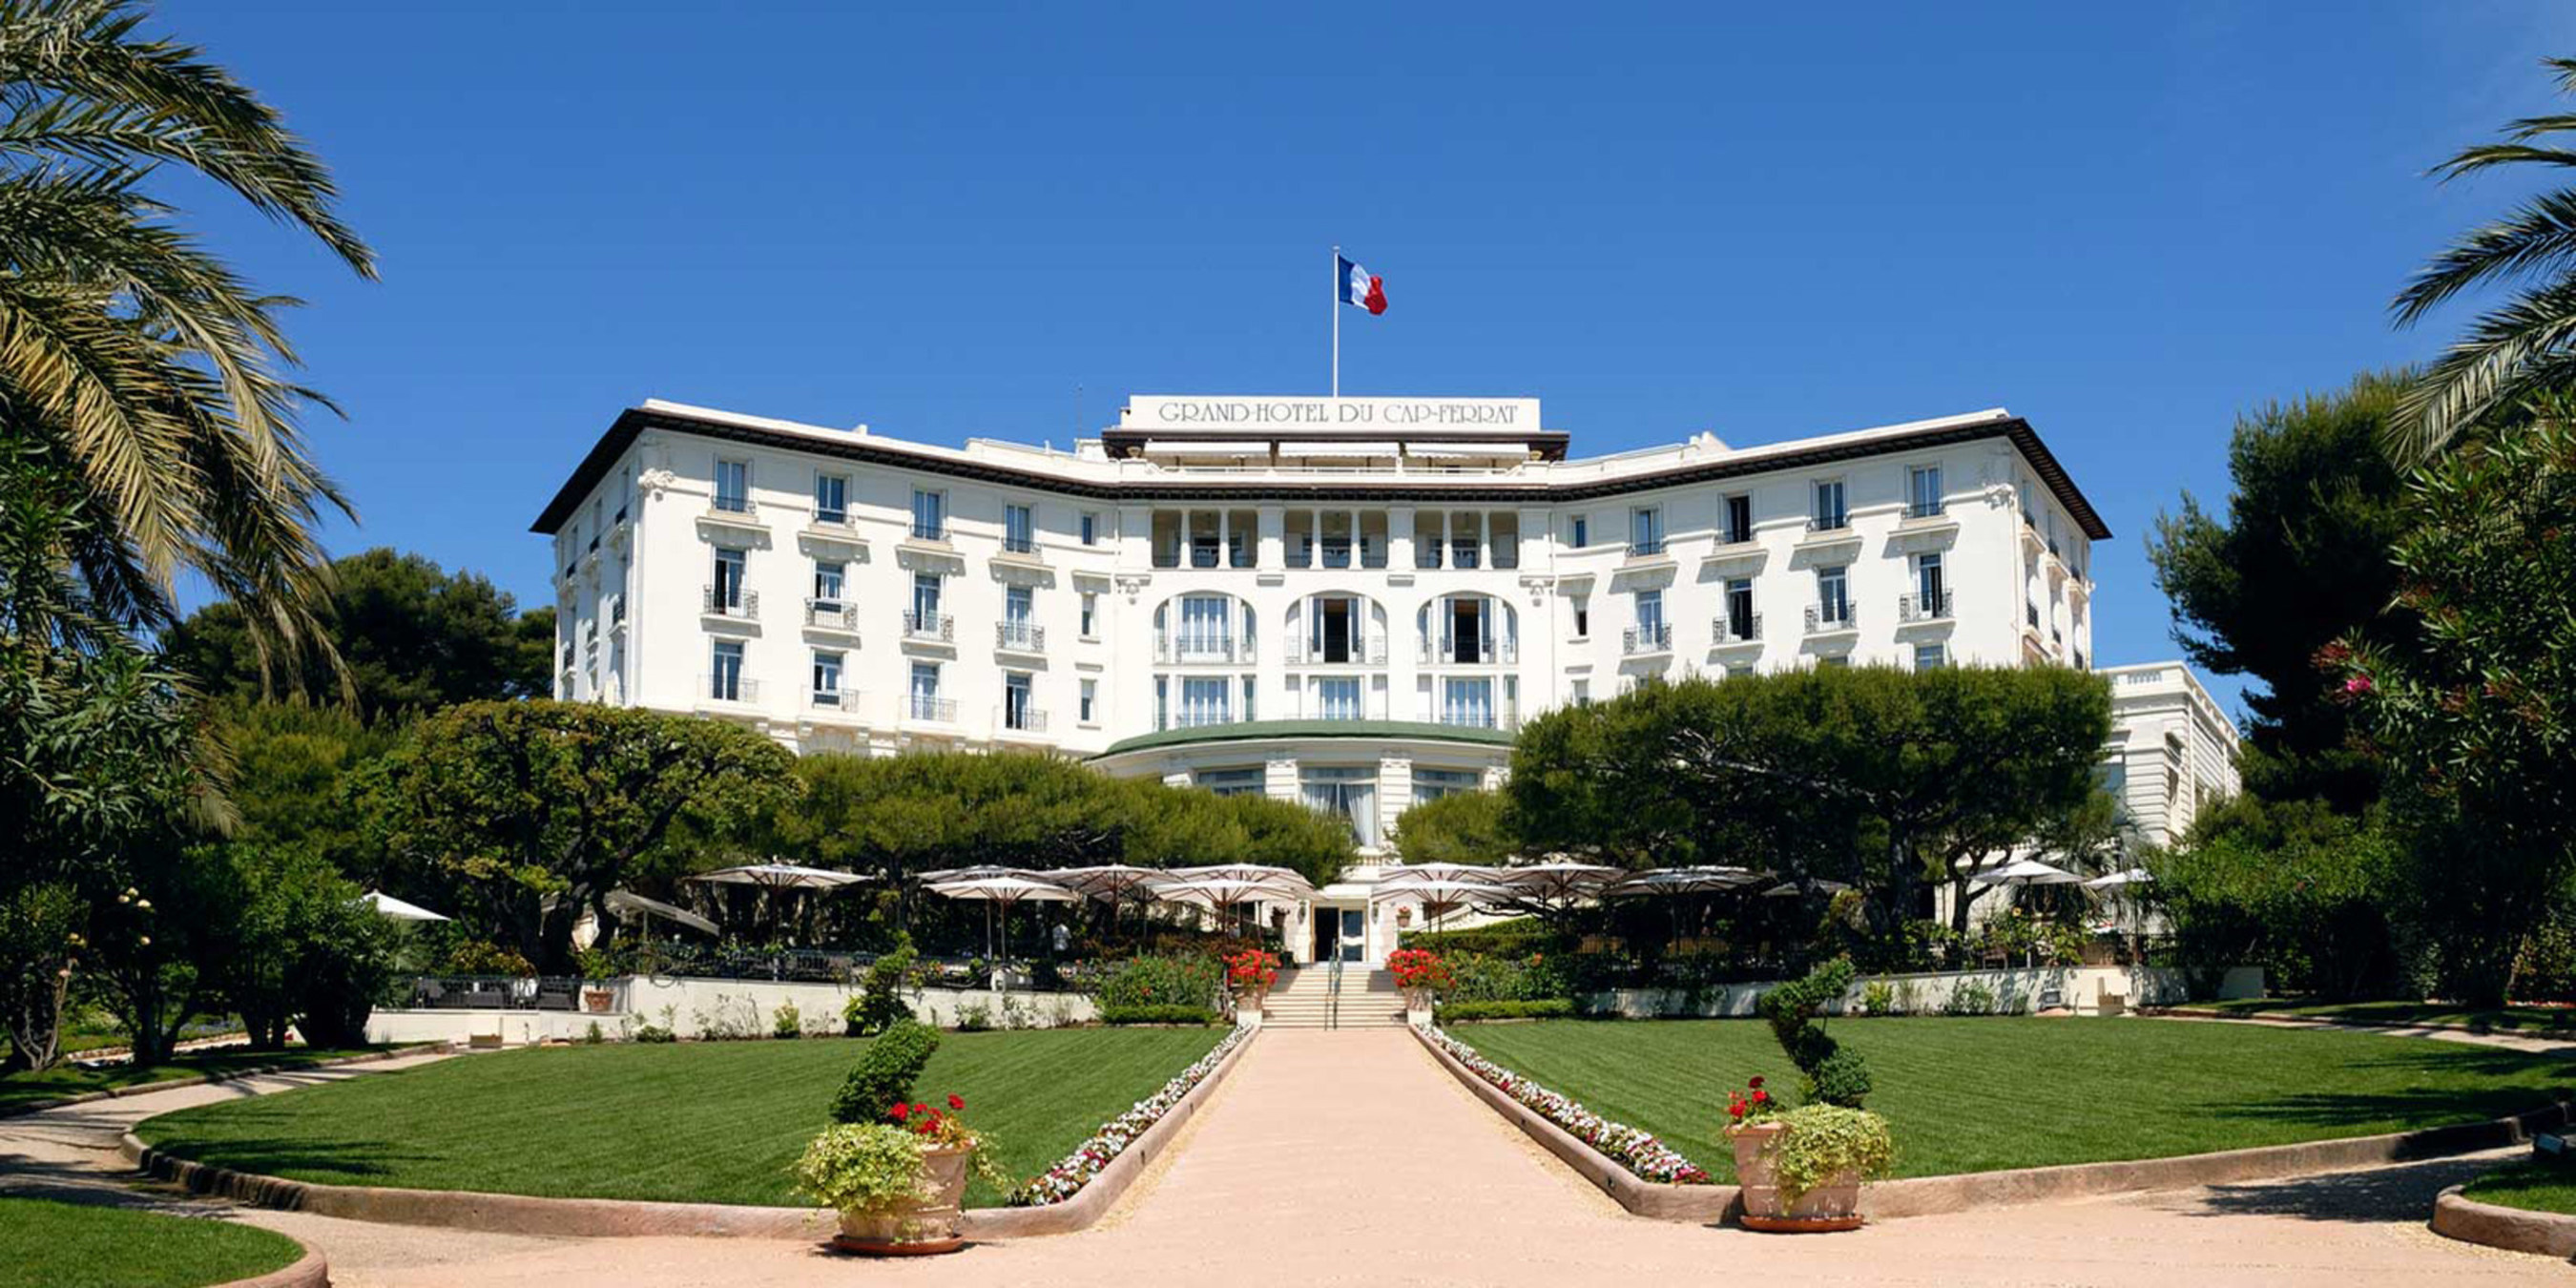 Access Industries Appoints Four Seasons Hotels and Resorts to Manage the Grand-Hotel du Cap-Ferrat, a Landmark of the Mediterranean Coastline